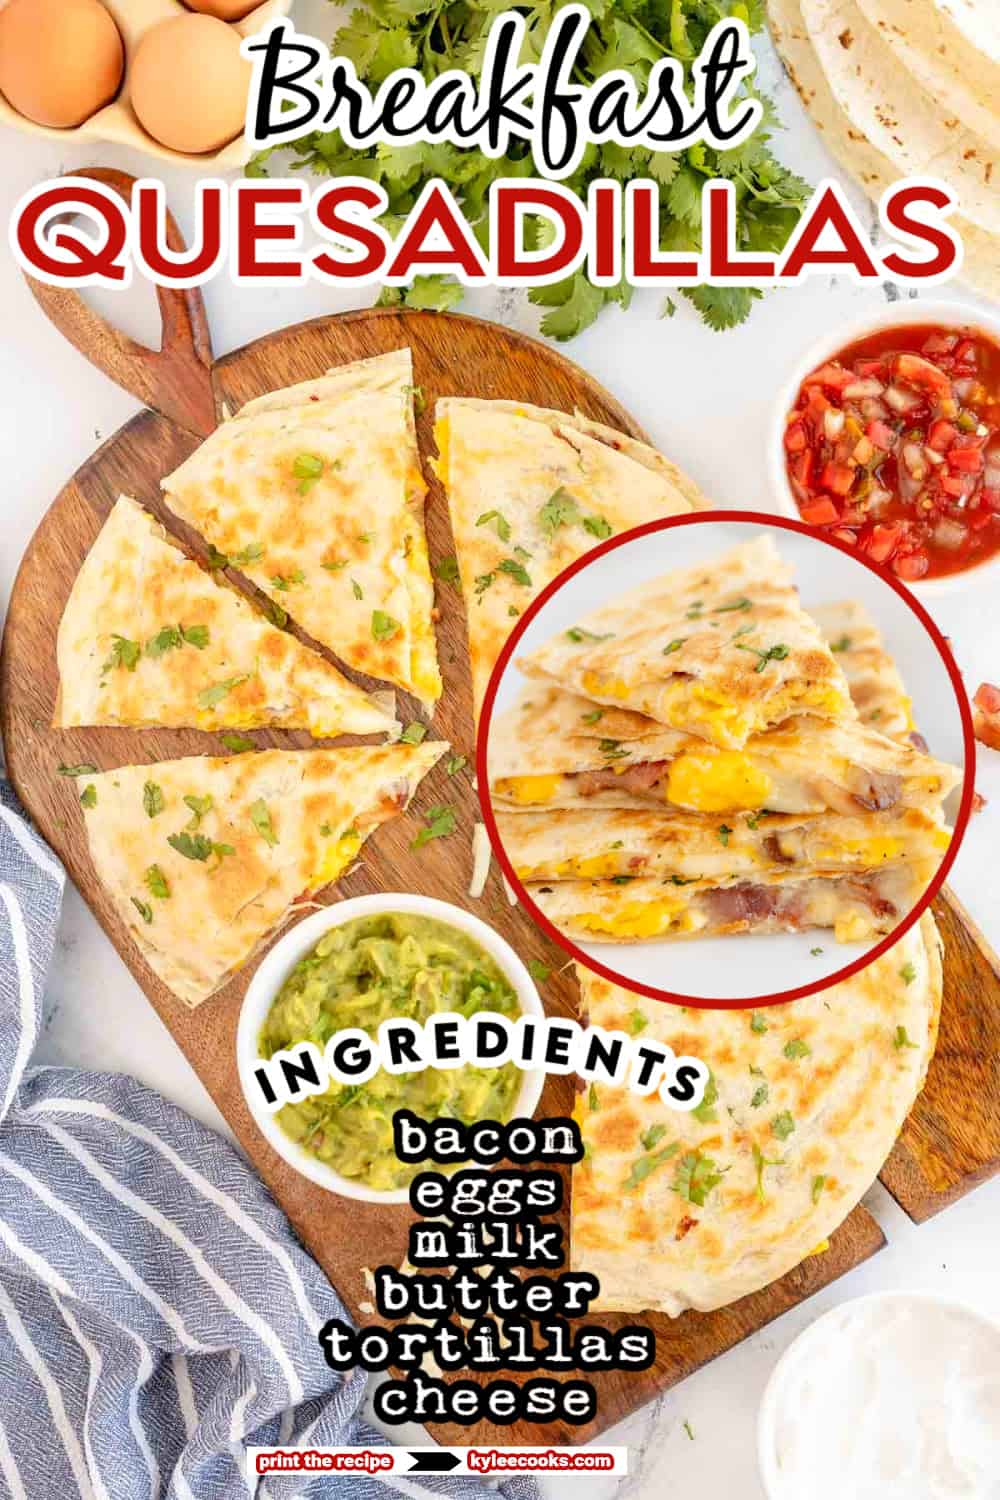 Breakfast quesadillas in a stack with recipe name and ingredients overlaid in text.